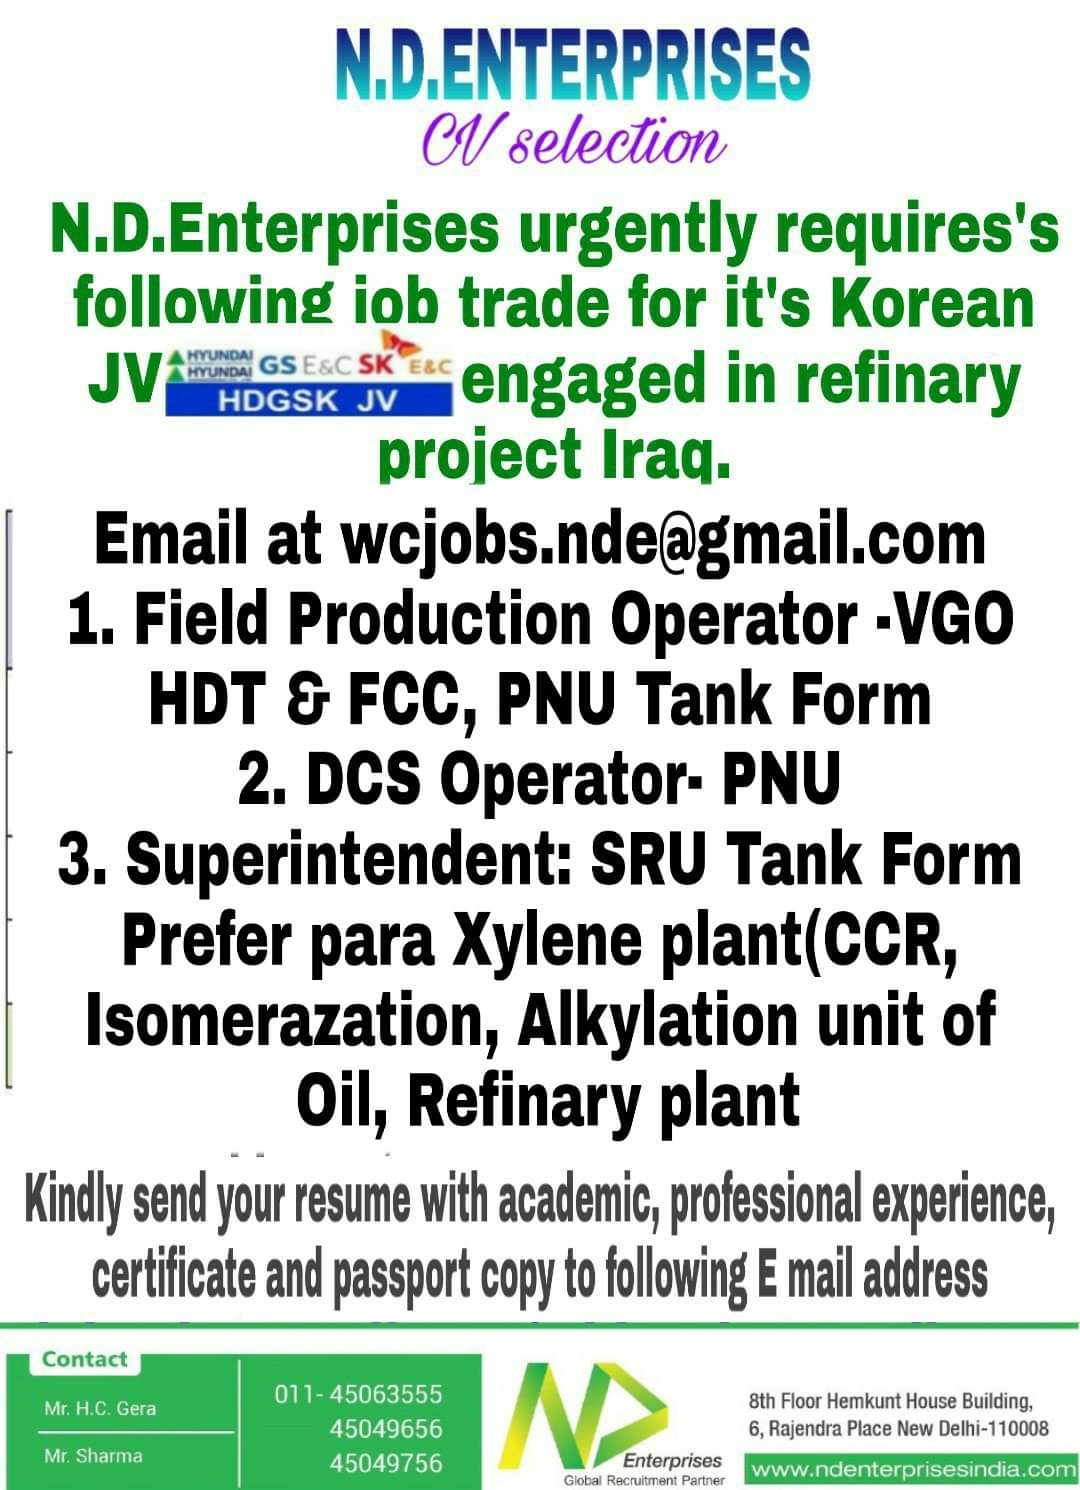 URGENTLY REQUIRES FOR JOB TRADE IN REFINARY PROJECT